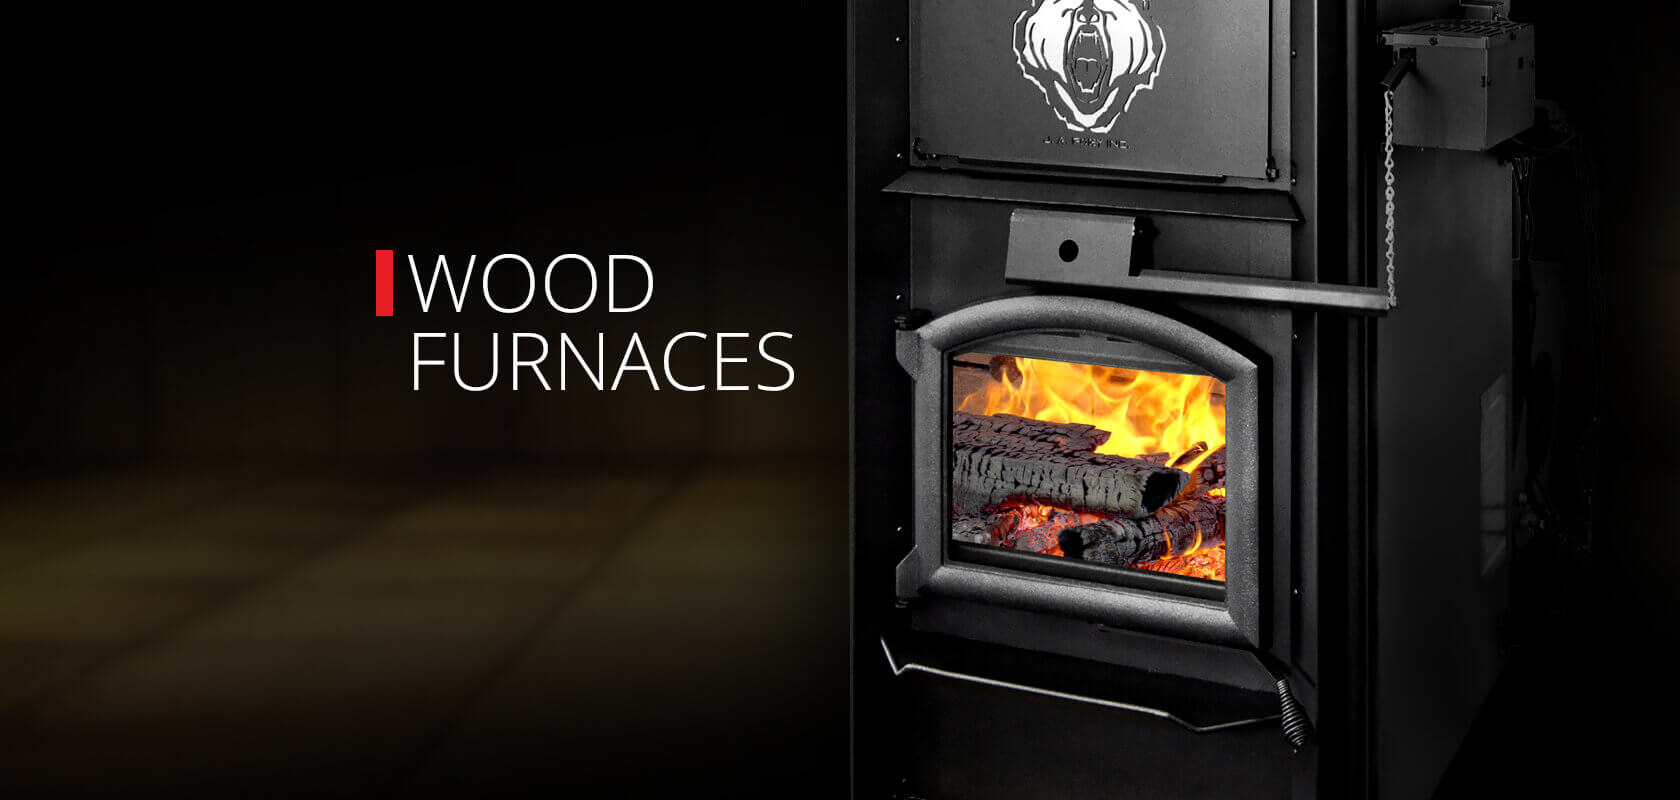 $750 OFF RIGEL WOOD COOK STOVE WITH WARMING SHELF- 1 LEFT